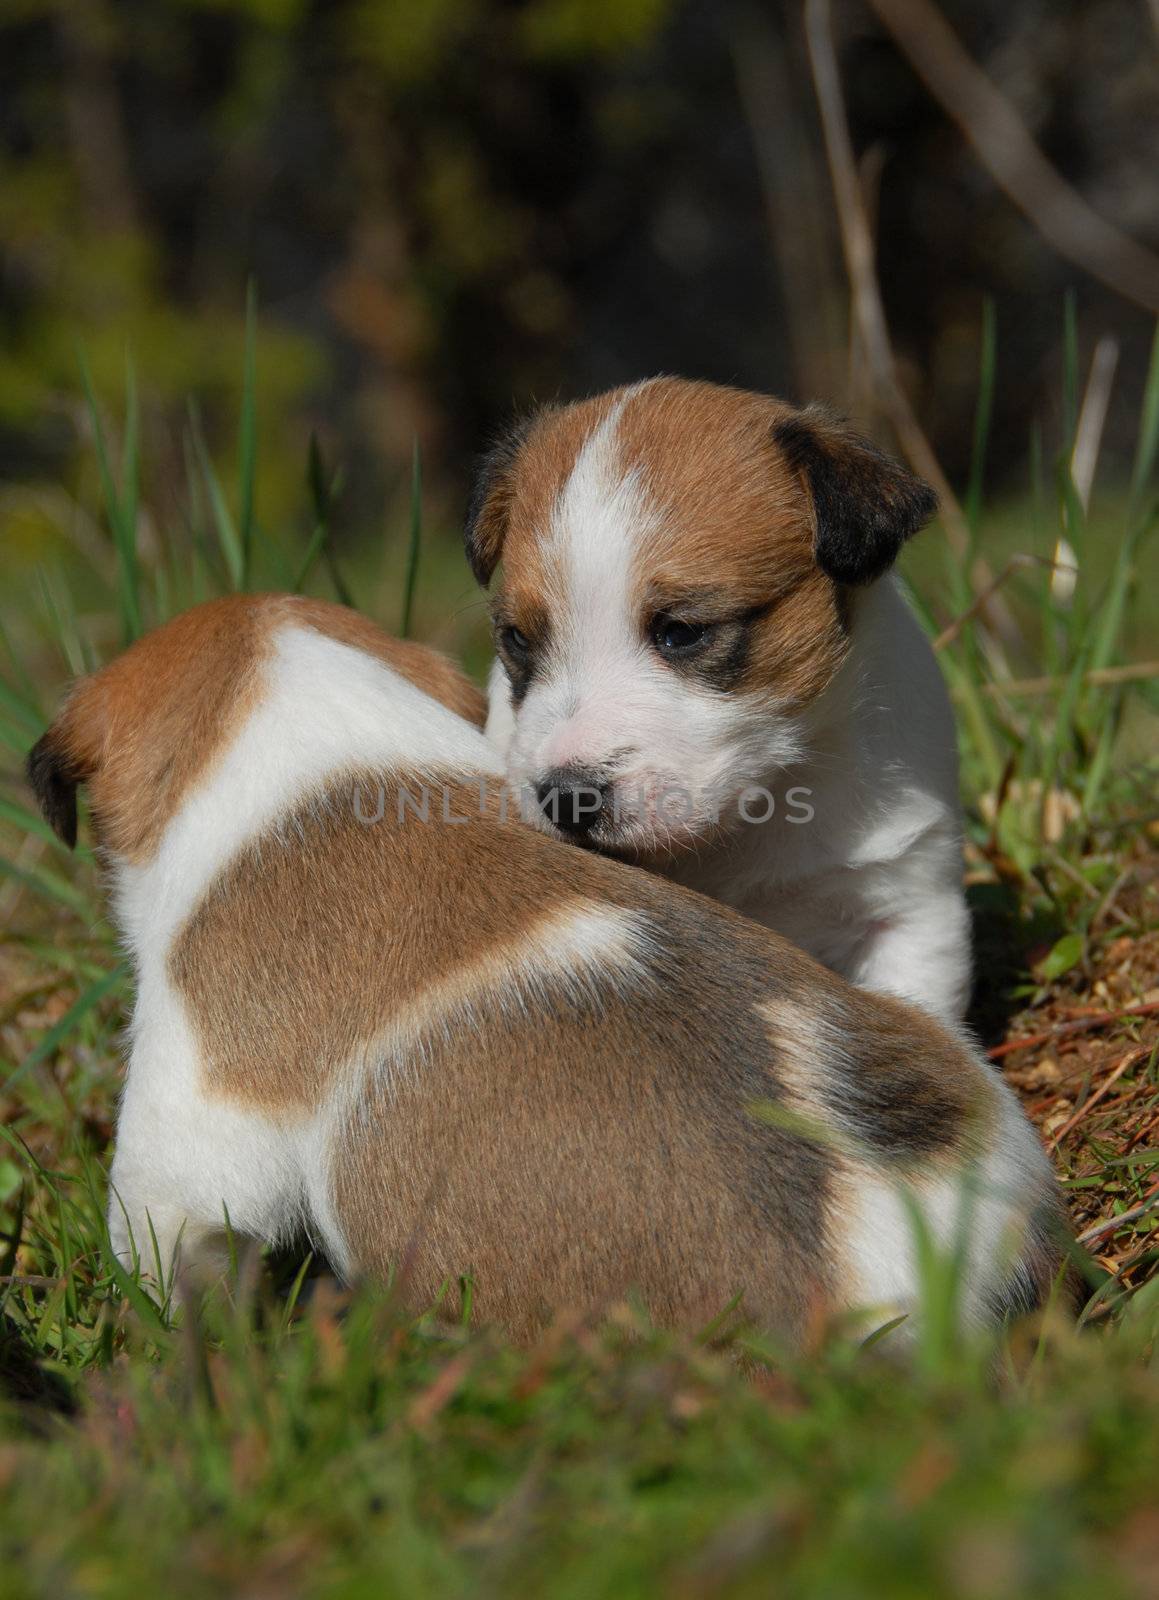 two puppies purebred jack russel terrier in a field